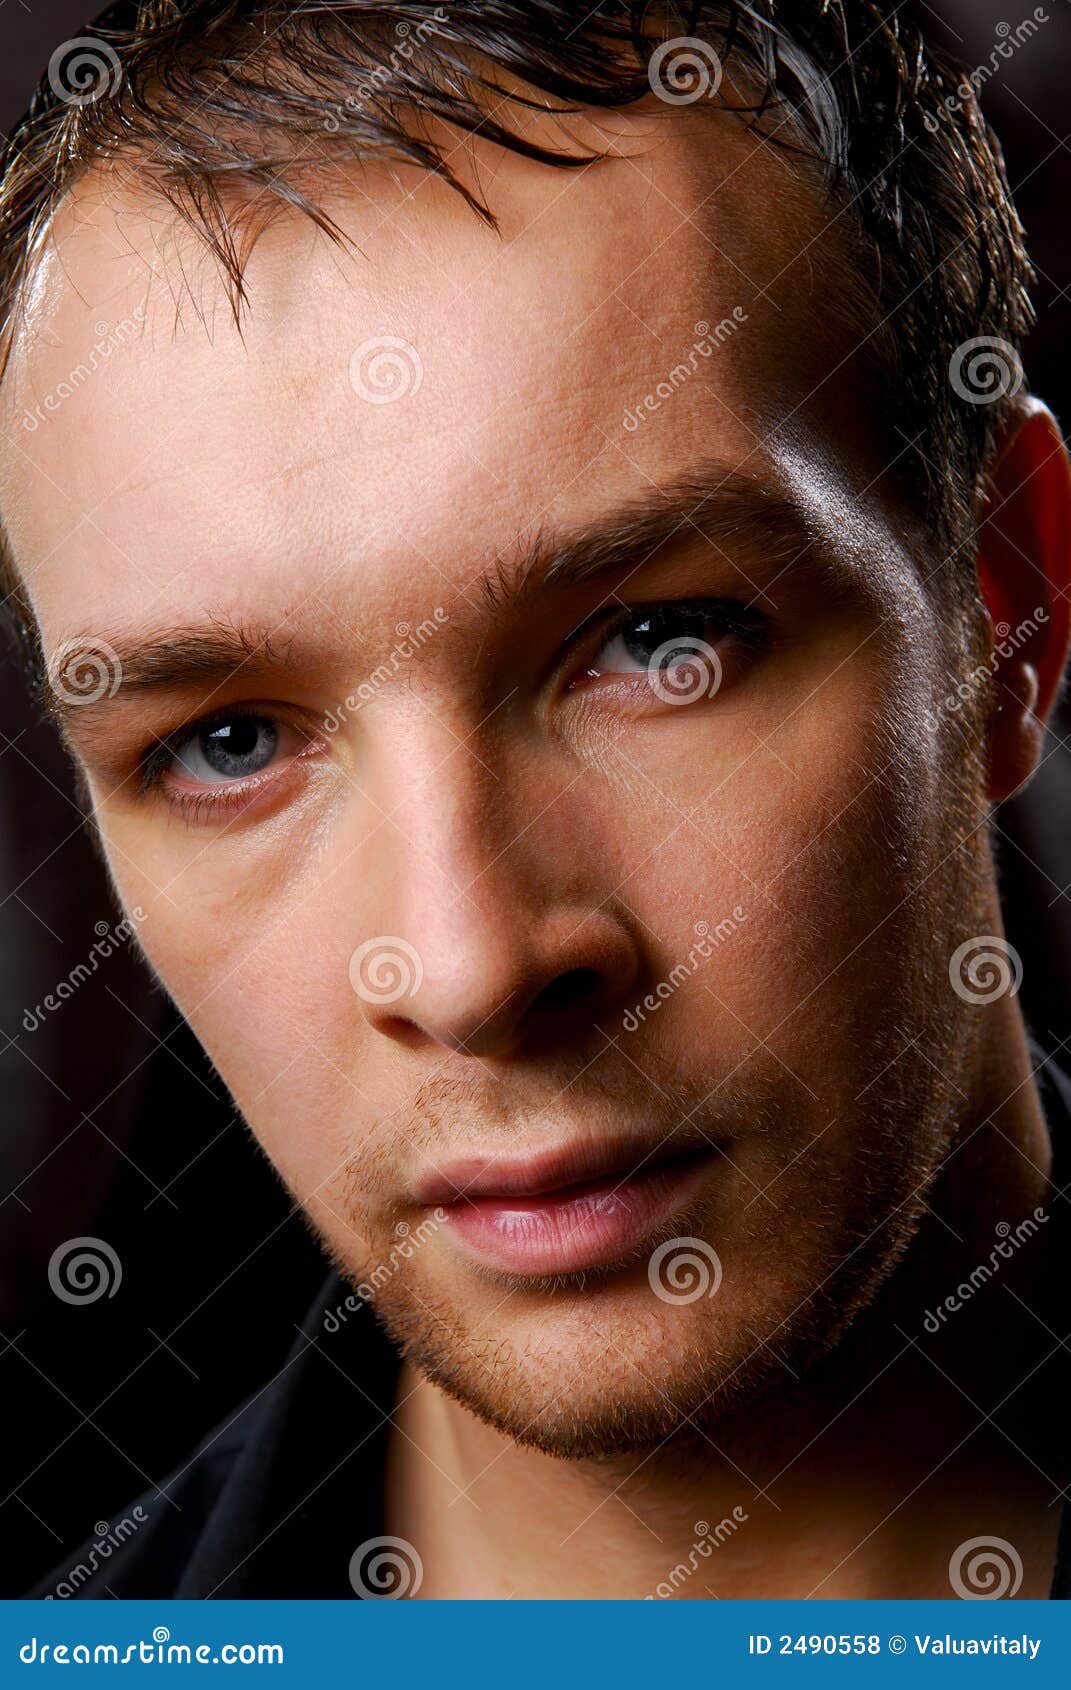 Man face close up stock photo. Image of adult, blue, look - 2490558